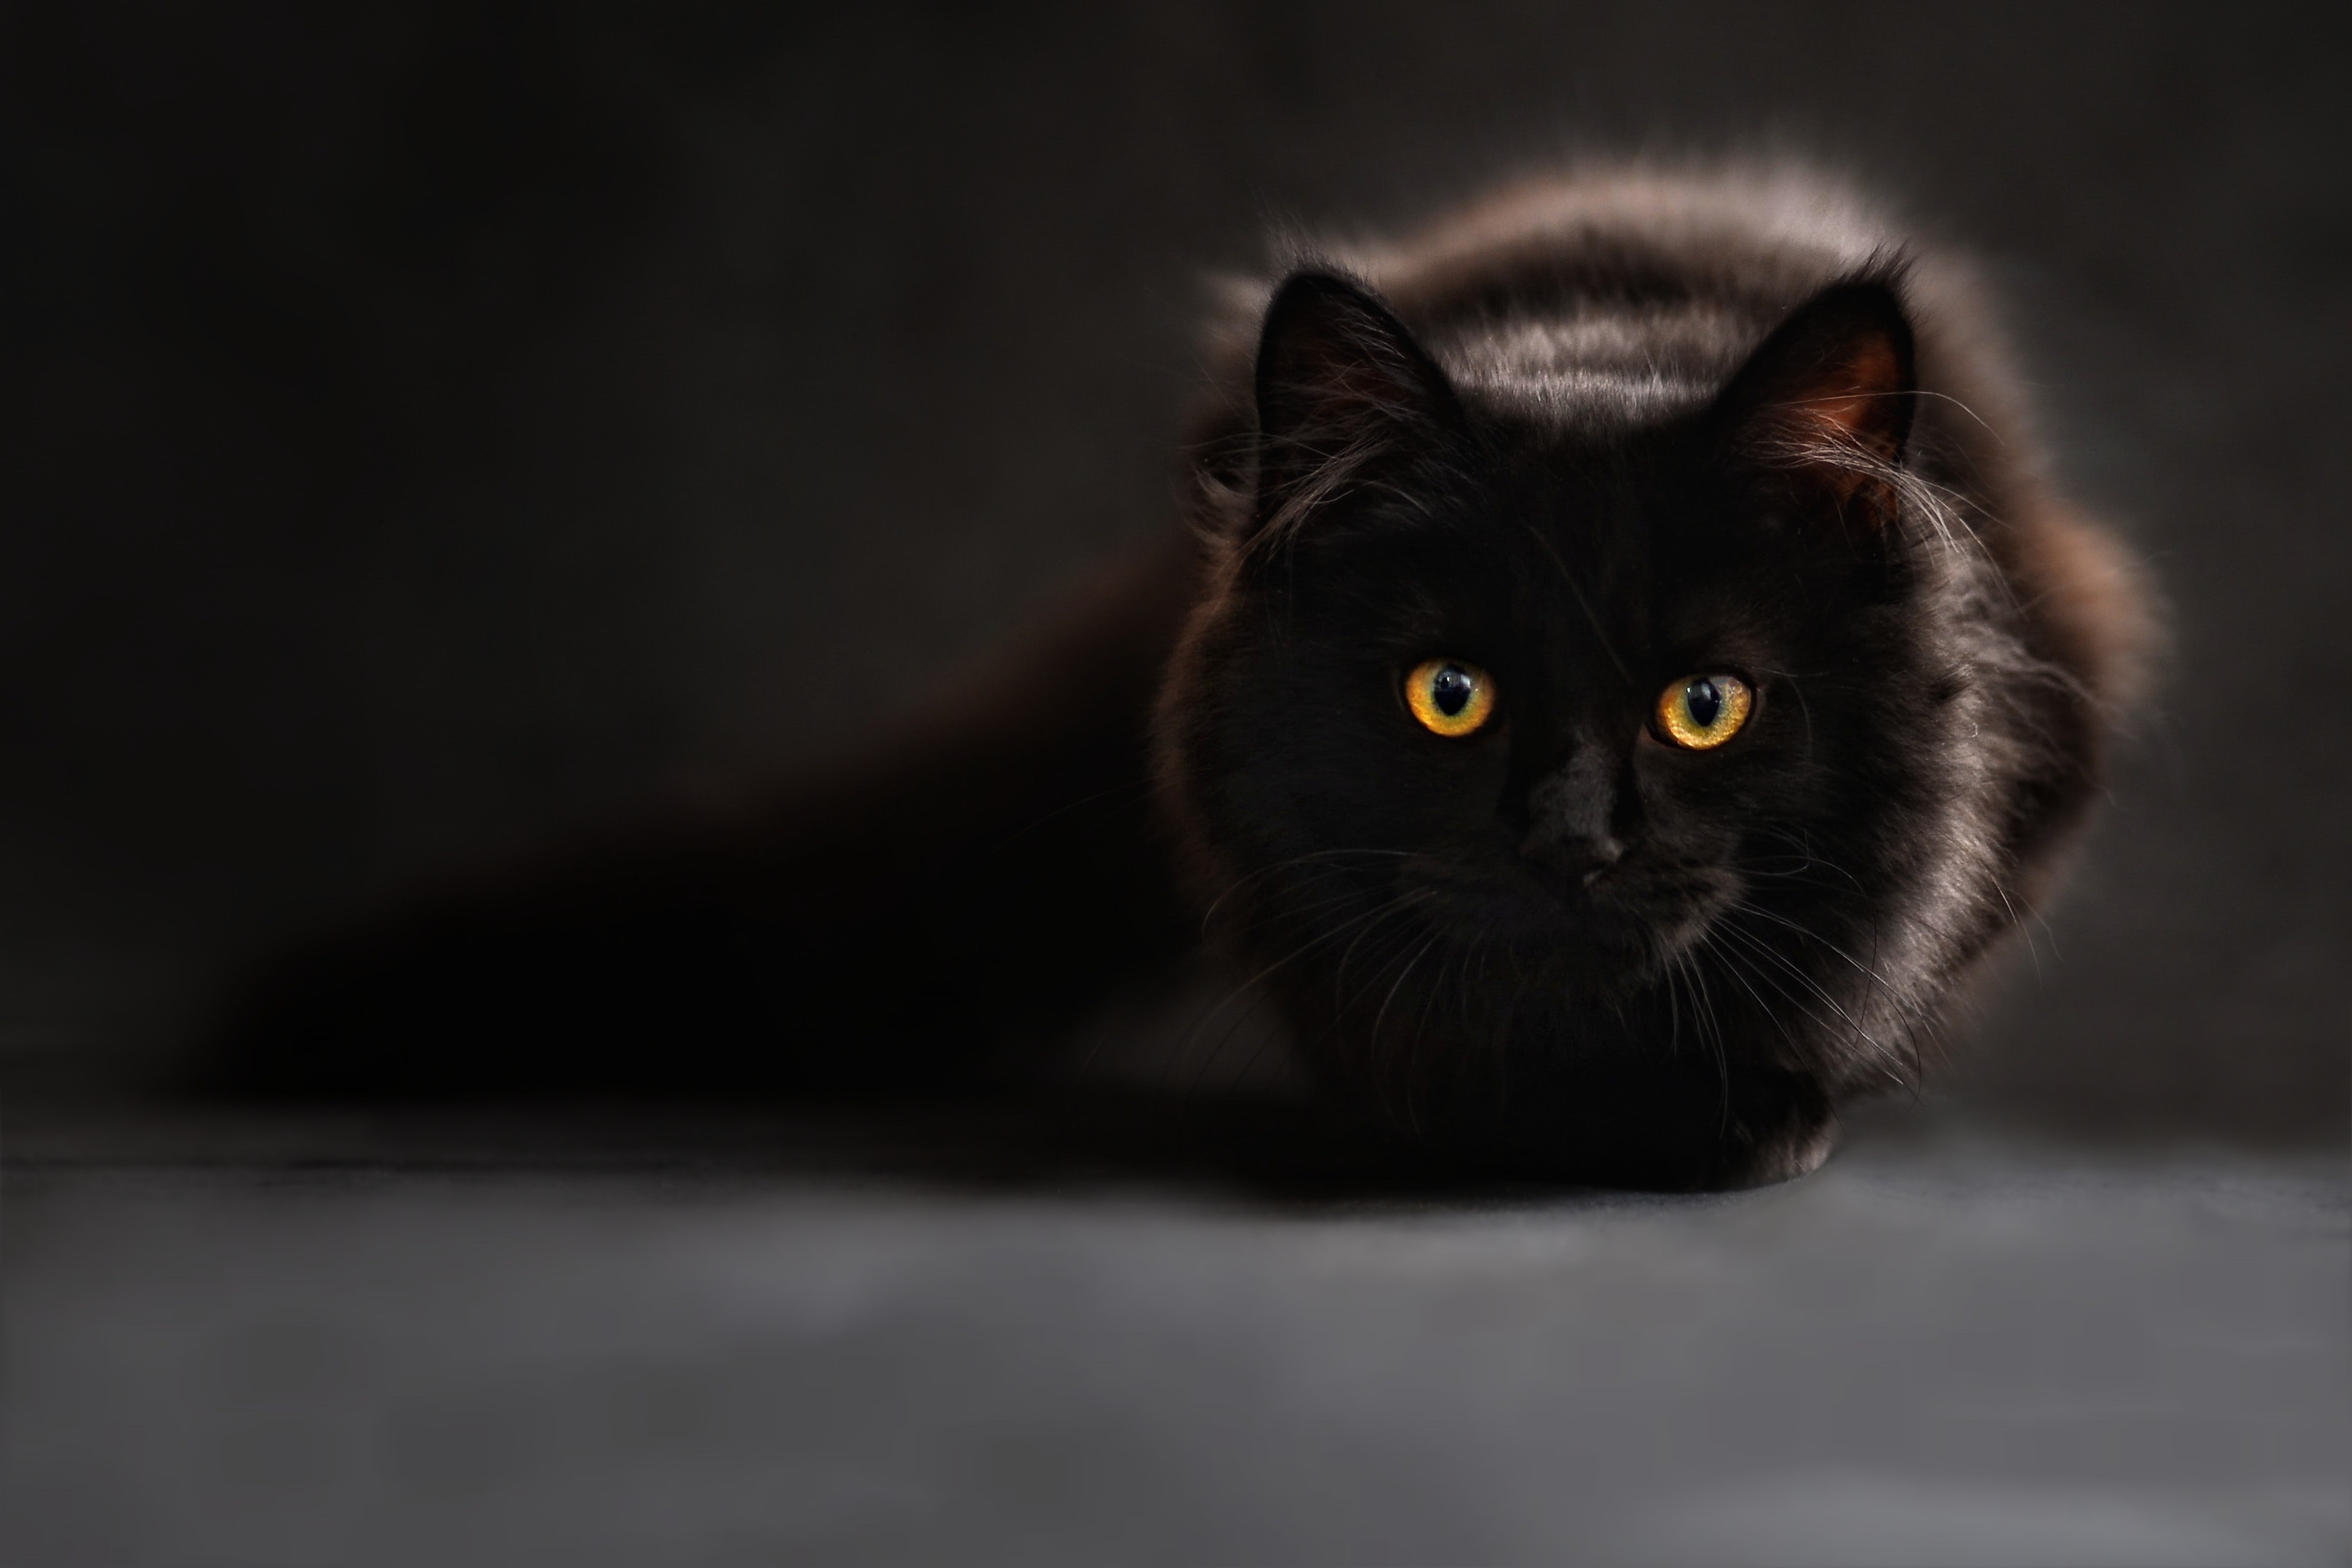 cat-silhouette-cats-silhouette-cat-s-eyes